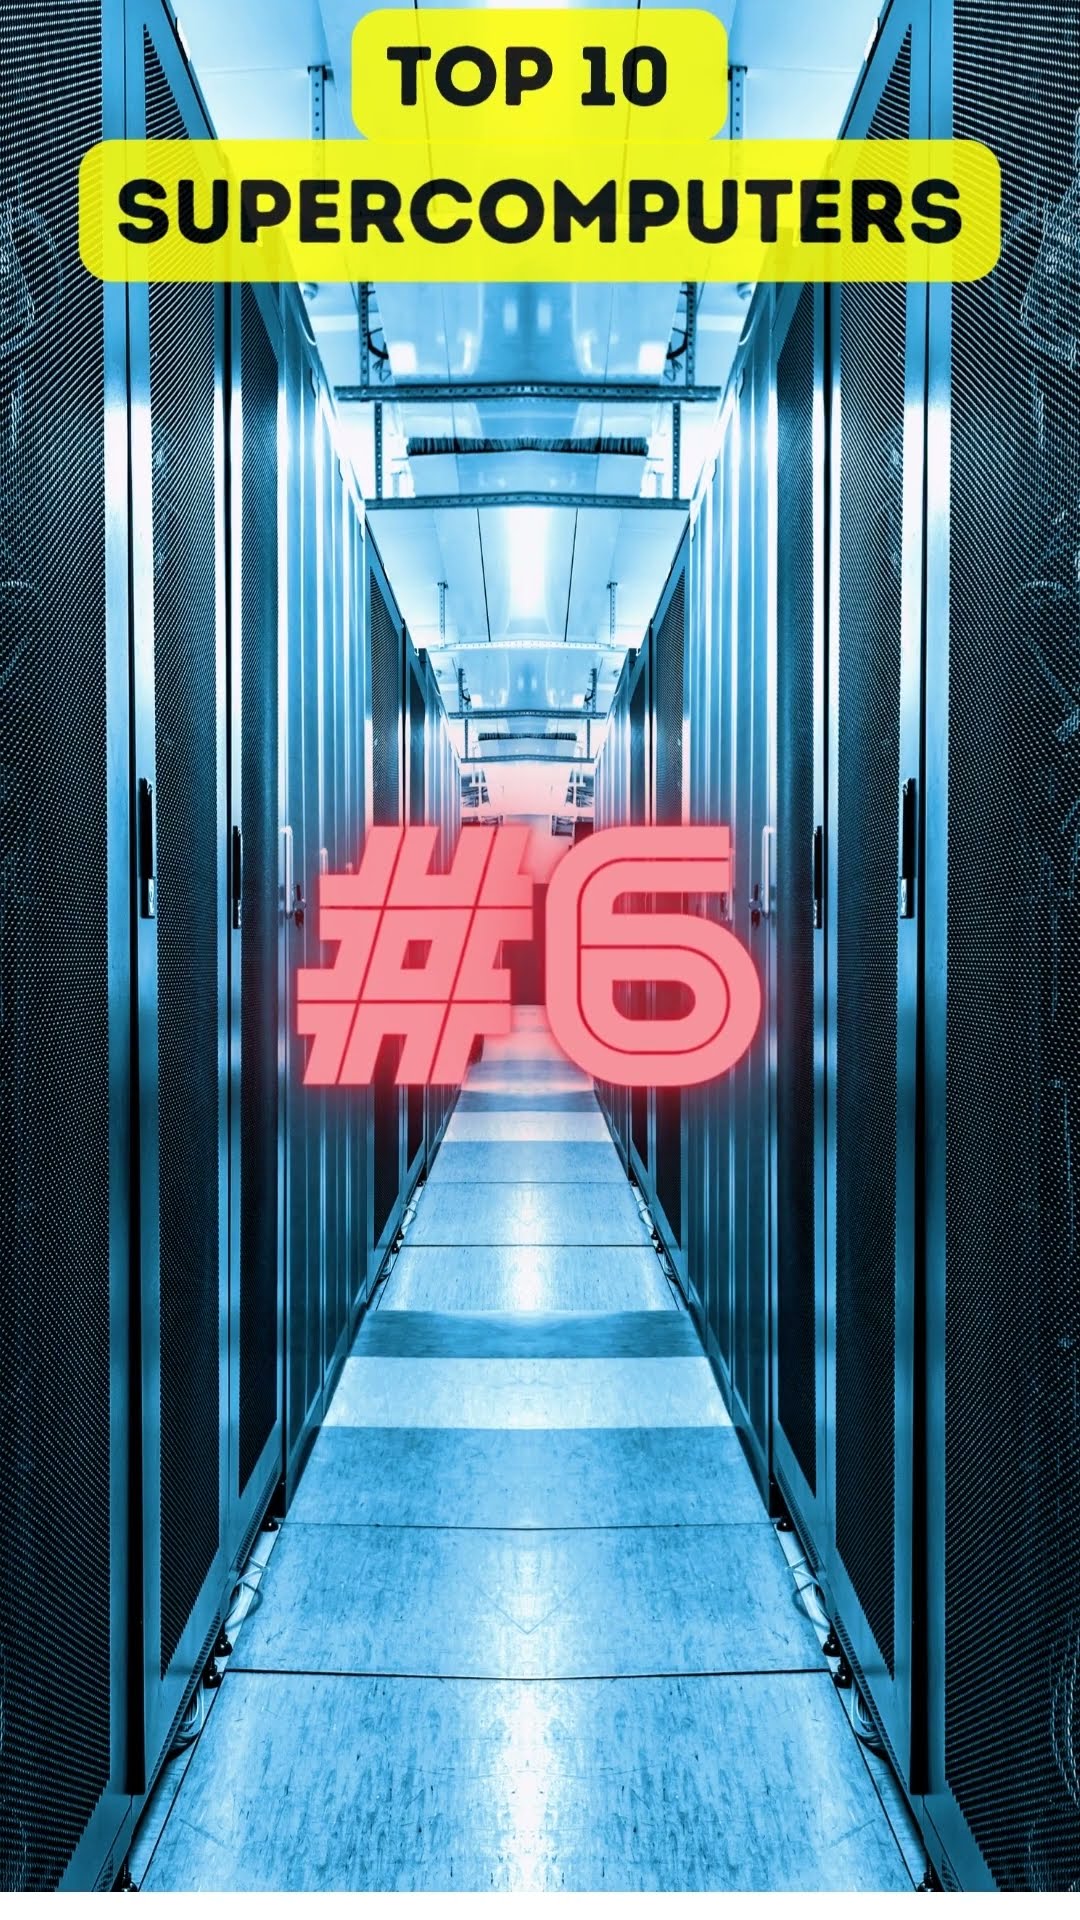 10 Most Powerful Supercomputers in the World Is the supercomputer powering Chat GPT present here?